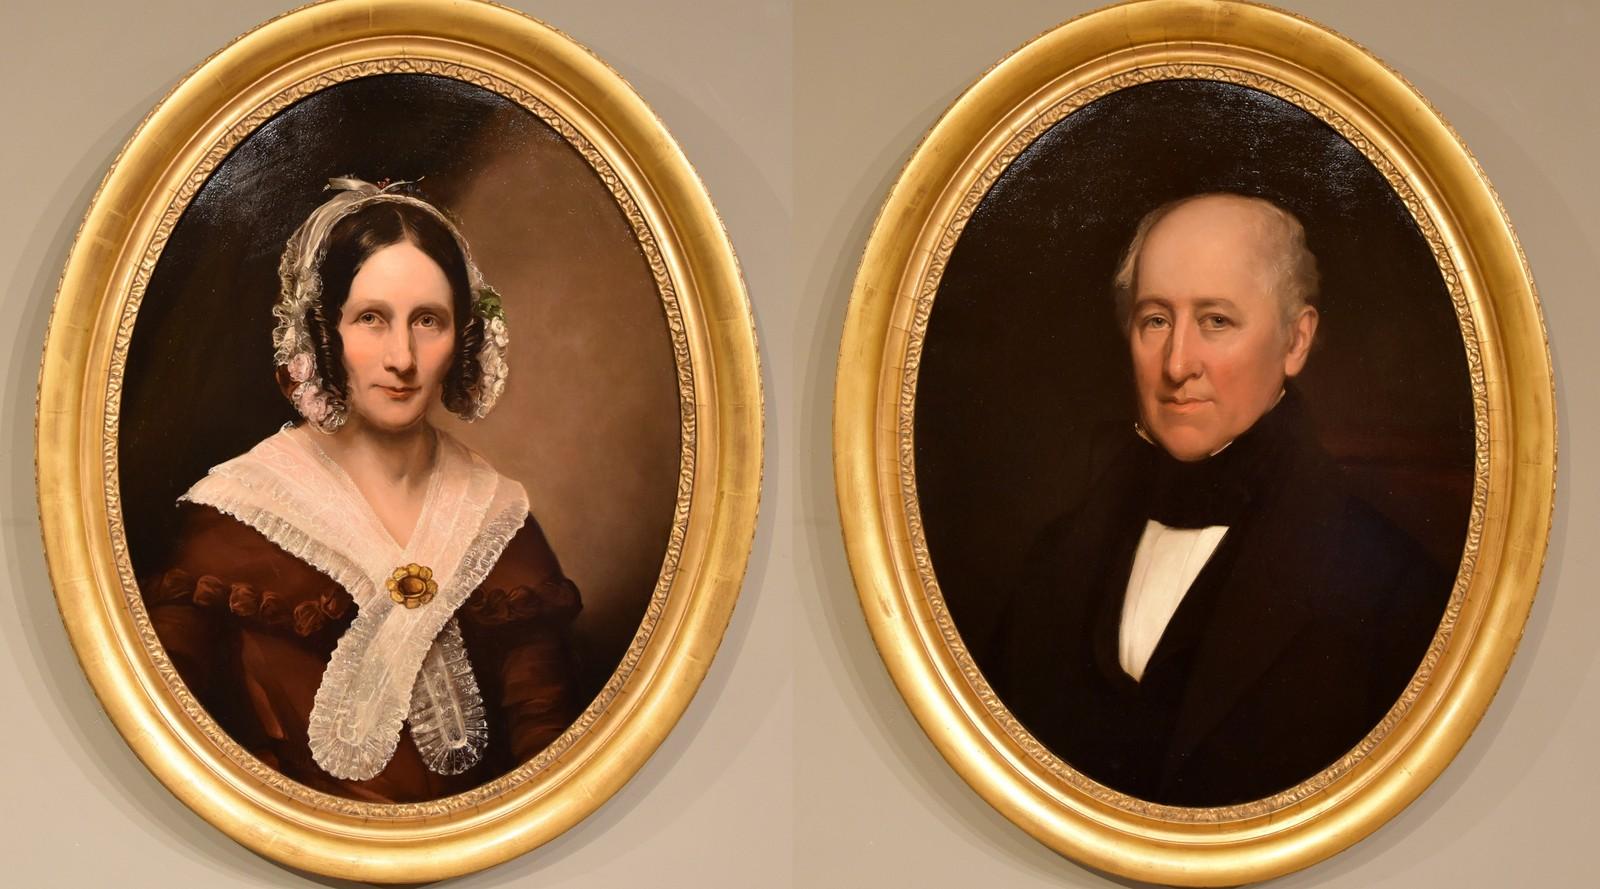 Unknown Portrait Painting - Oil Painting by English School "Portraits of a Lady and Gentleman" 